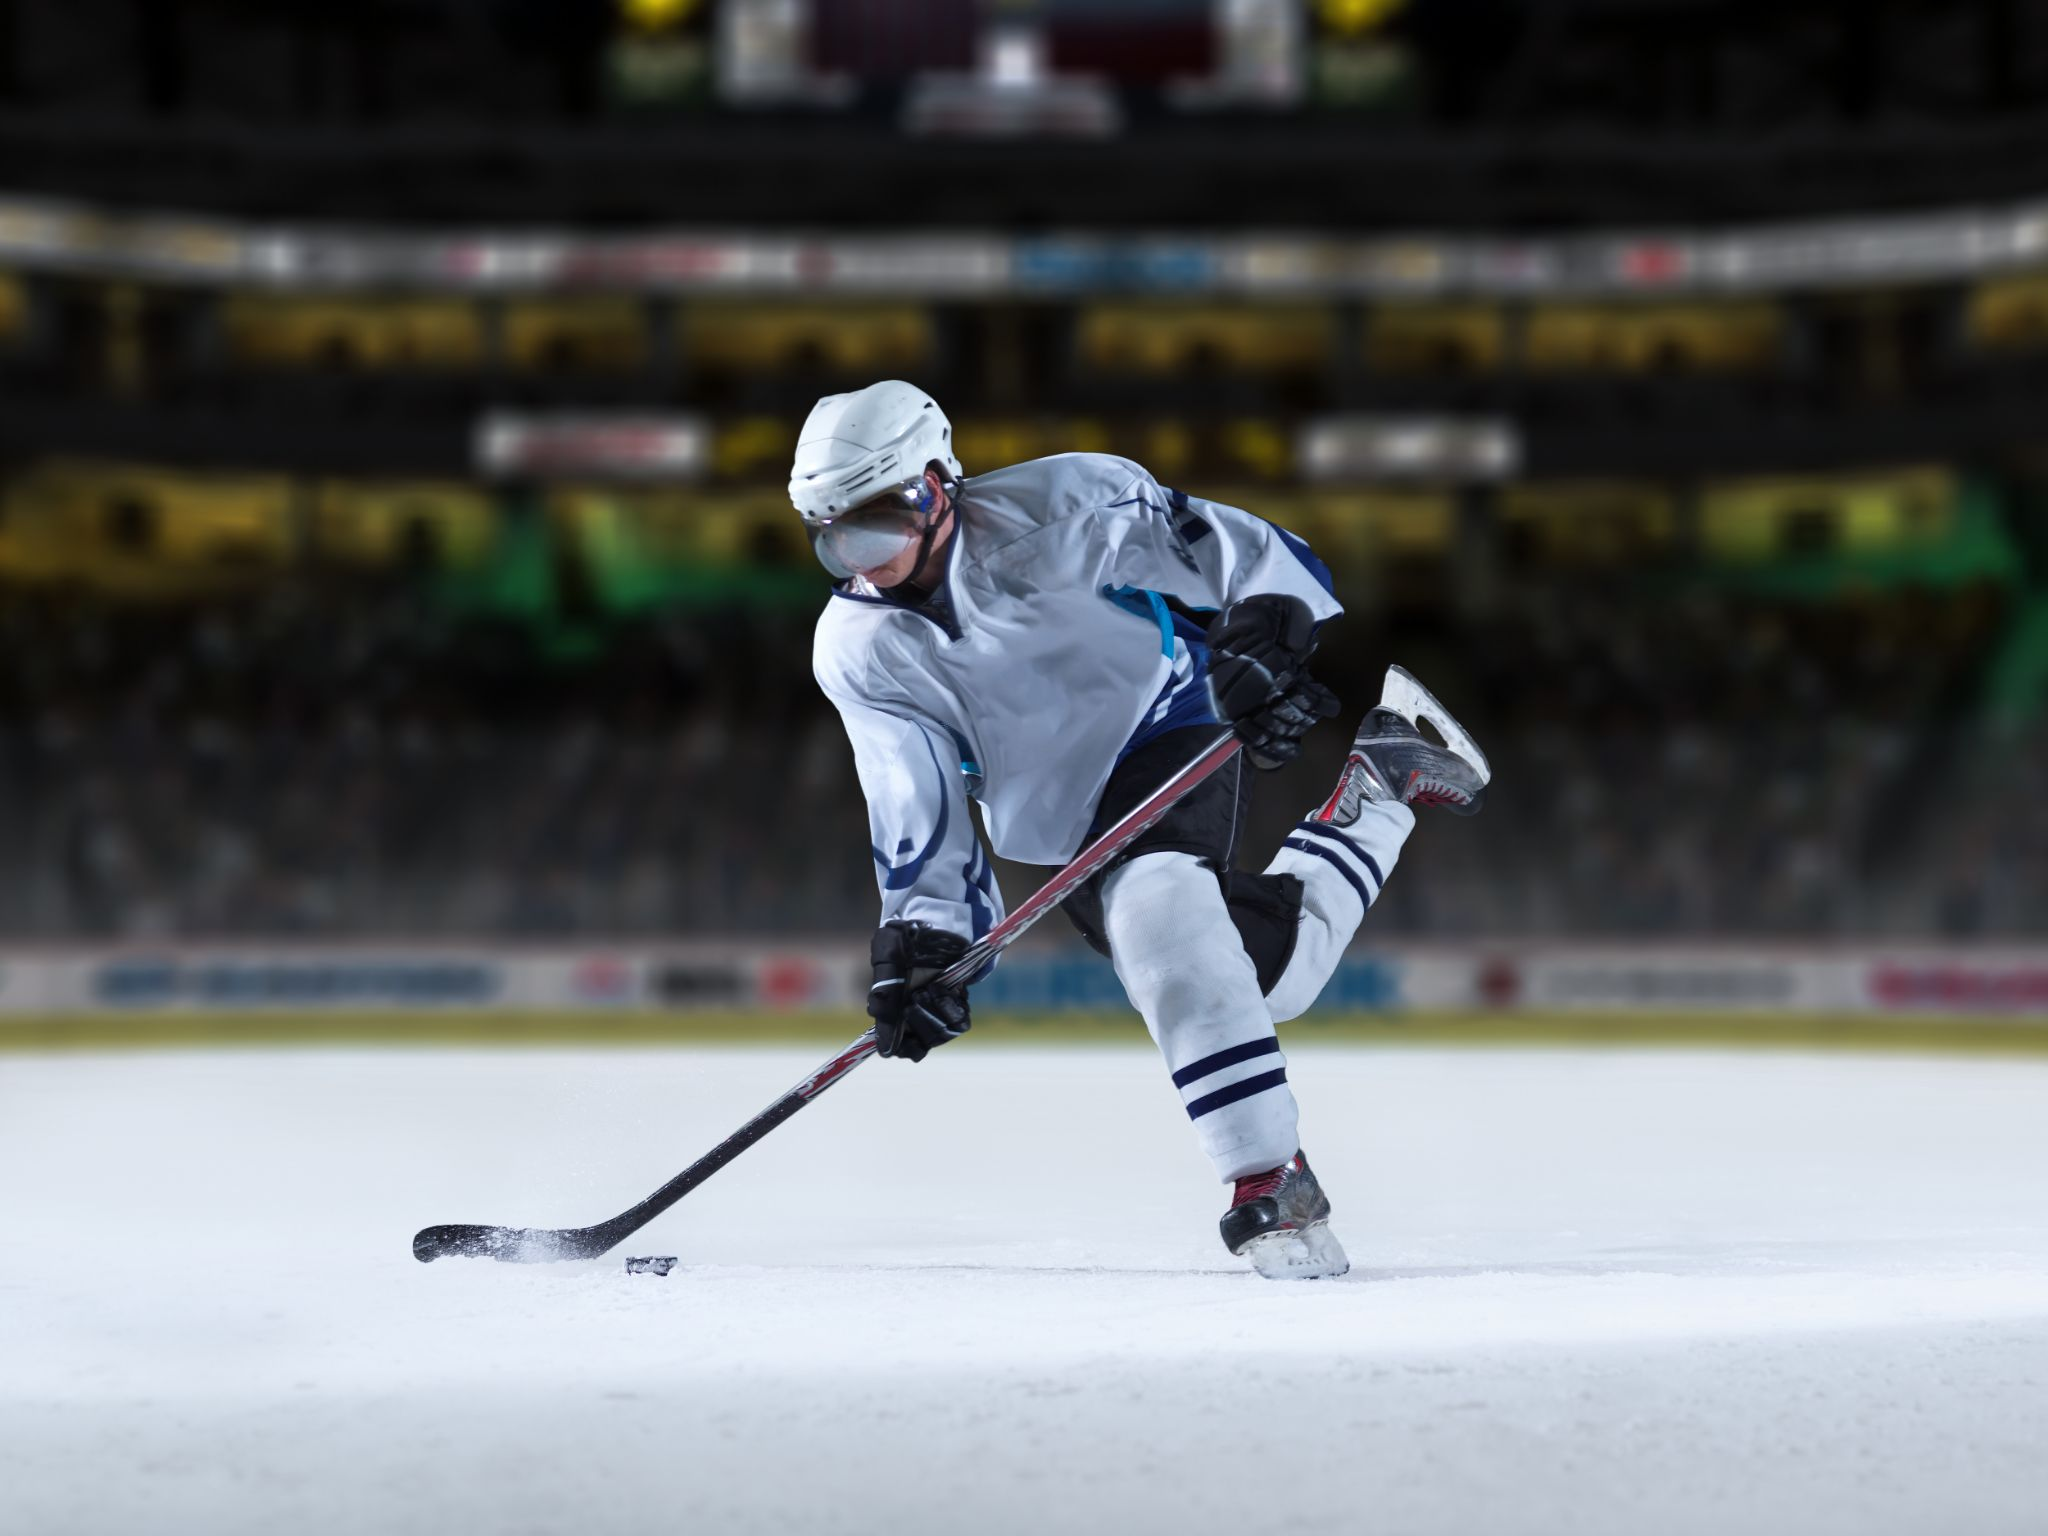 An ice hockey player in action